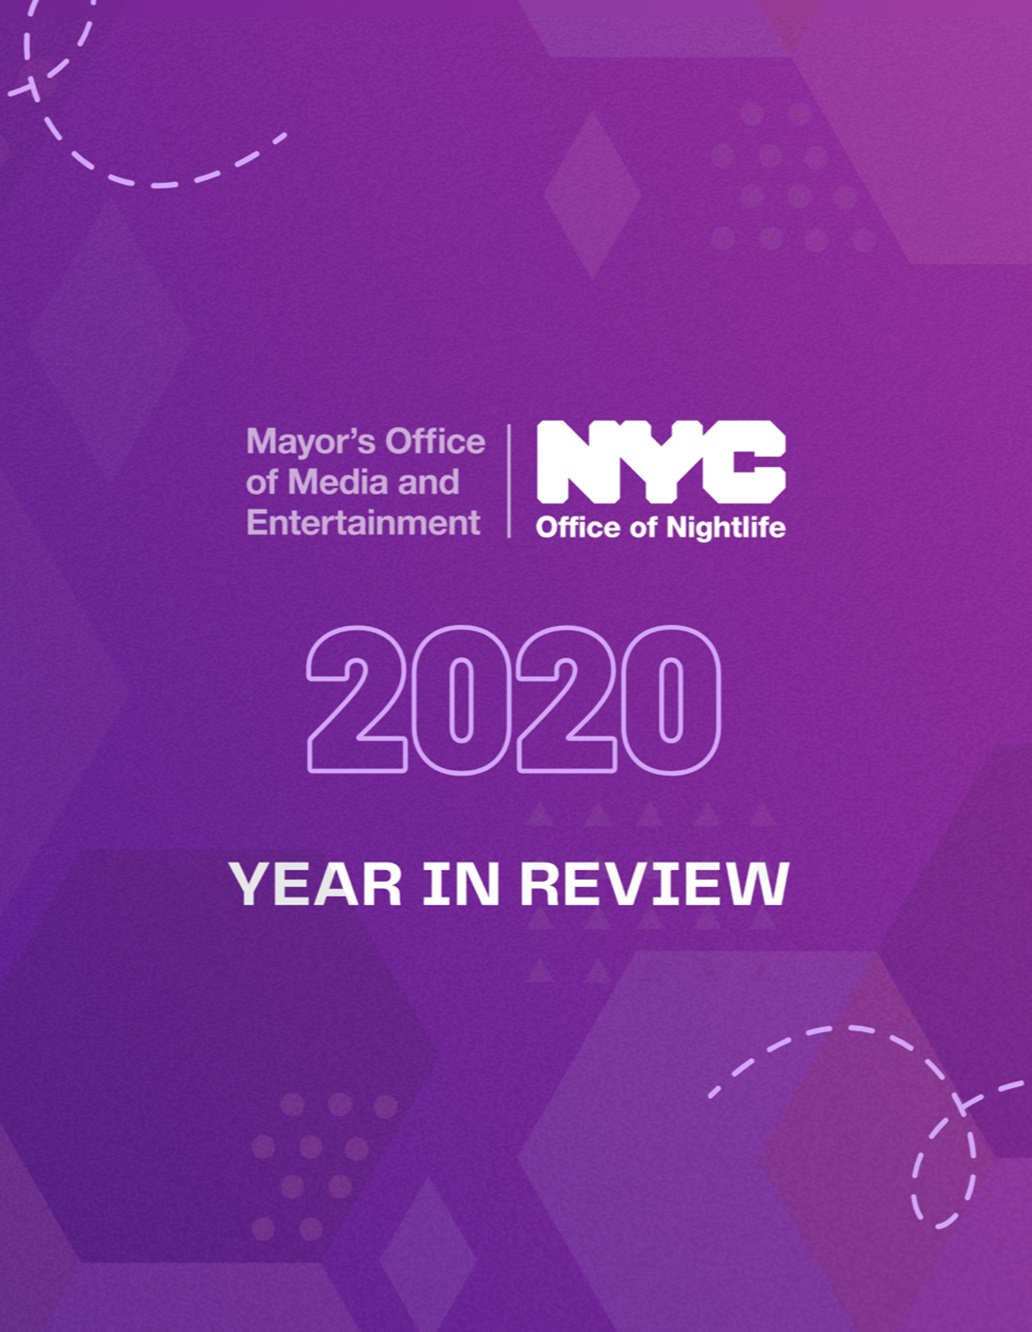 Office of Nightlife: 2020 Year in Review